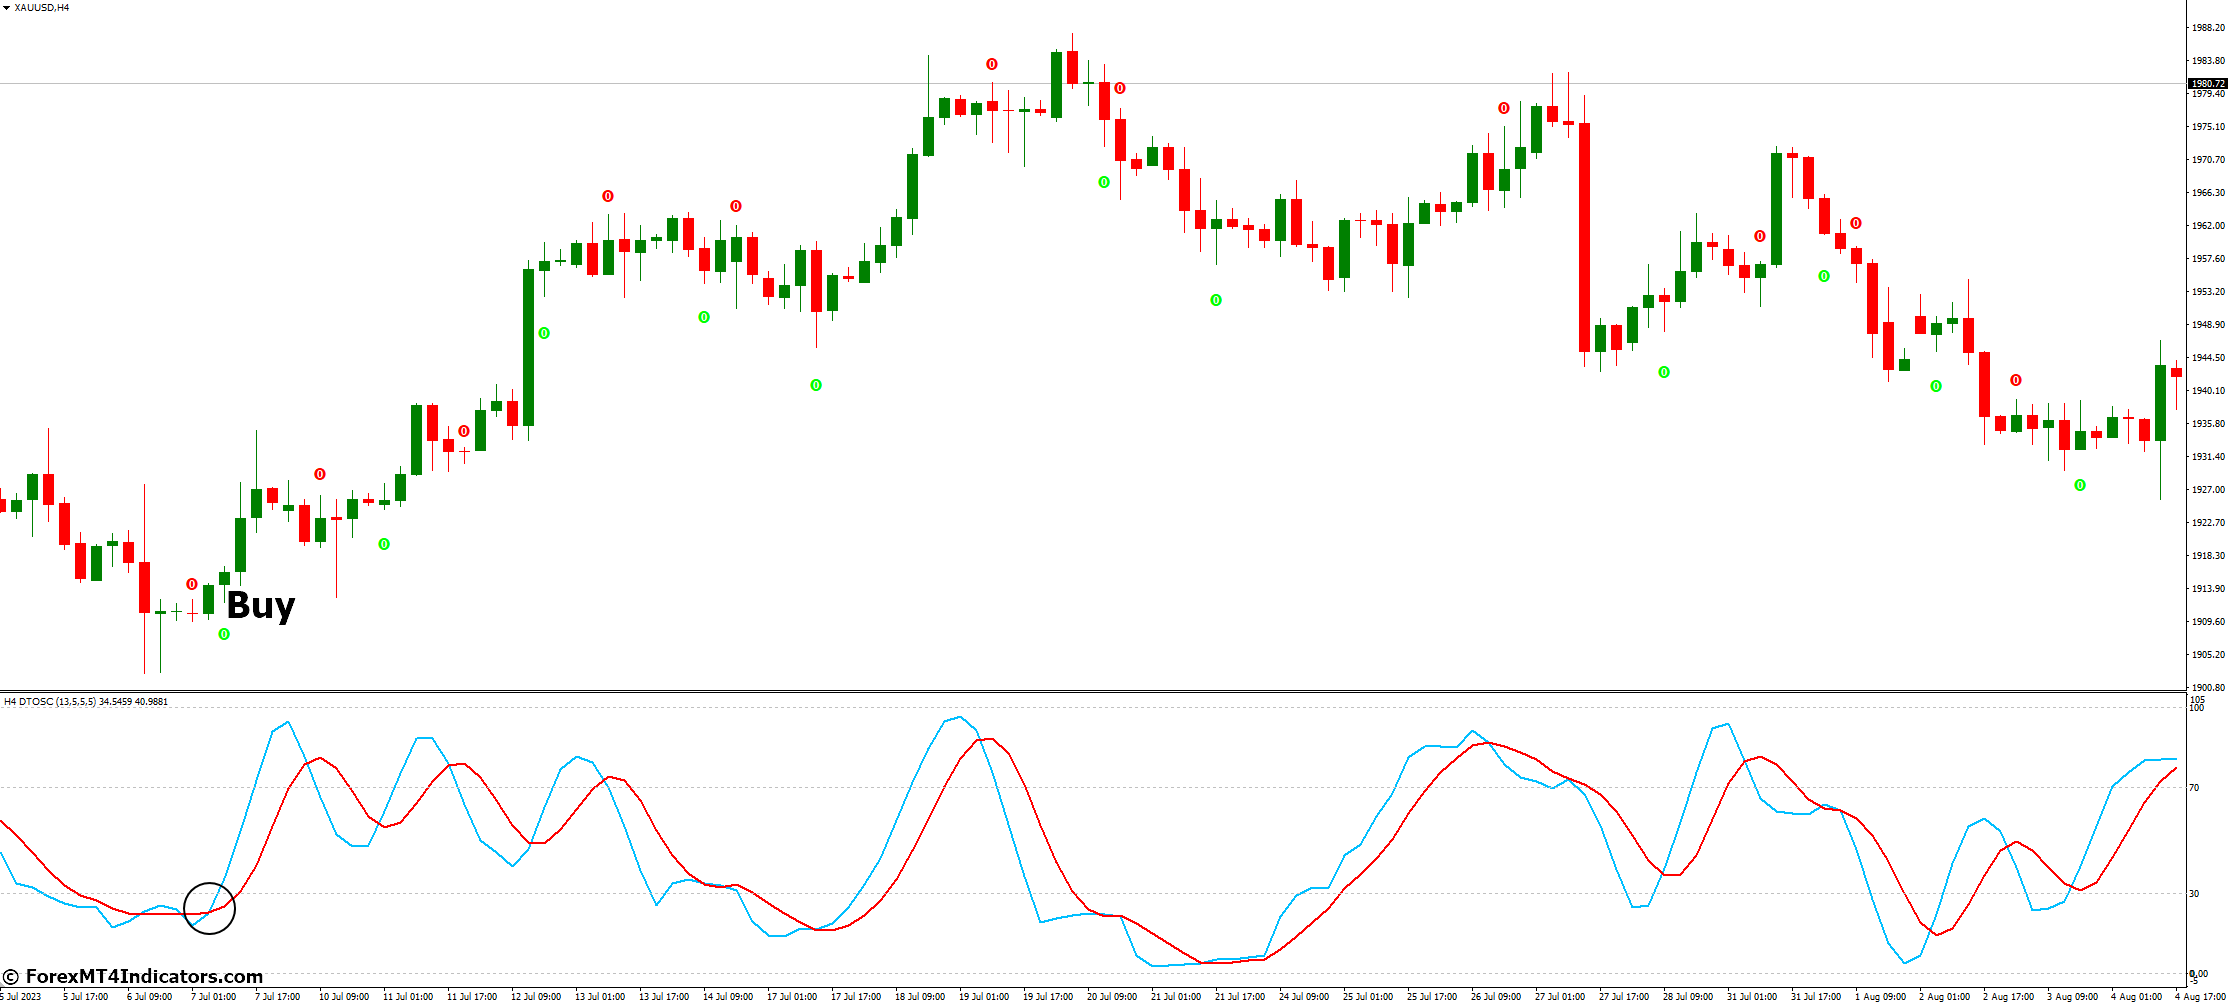 How to Trade with DTOSC MT4 Indicator - Buy Entry